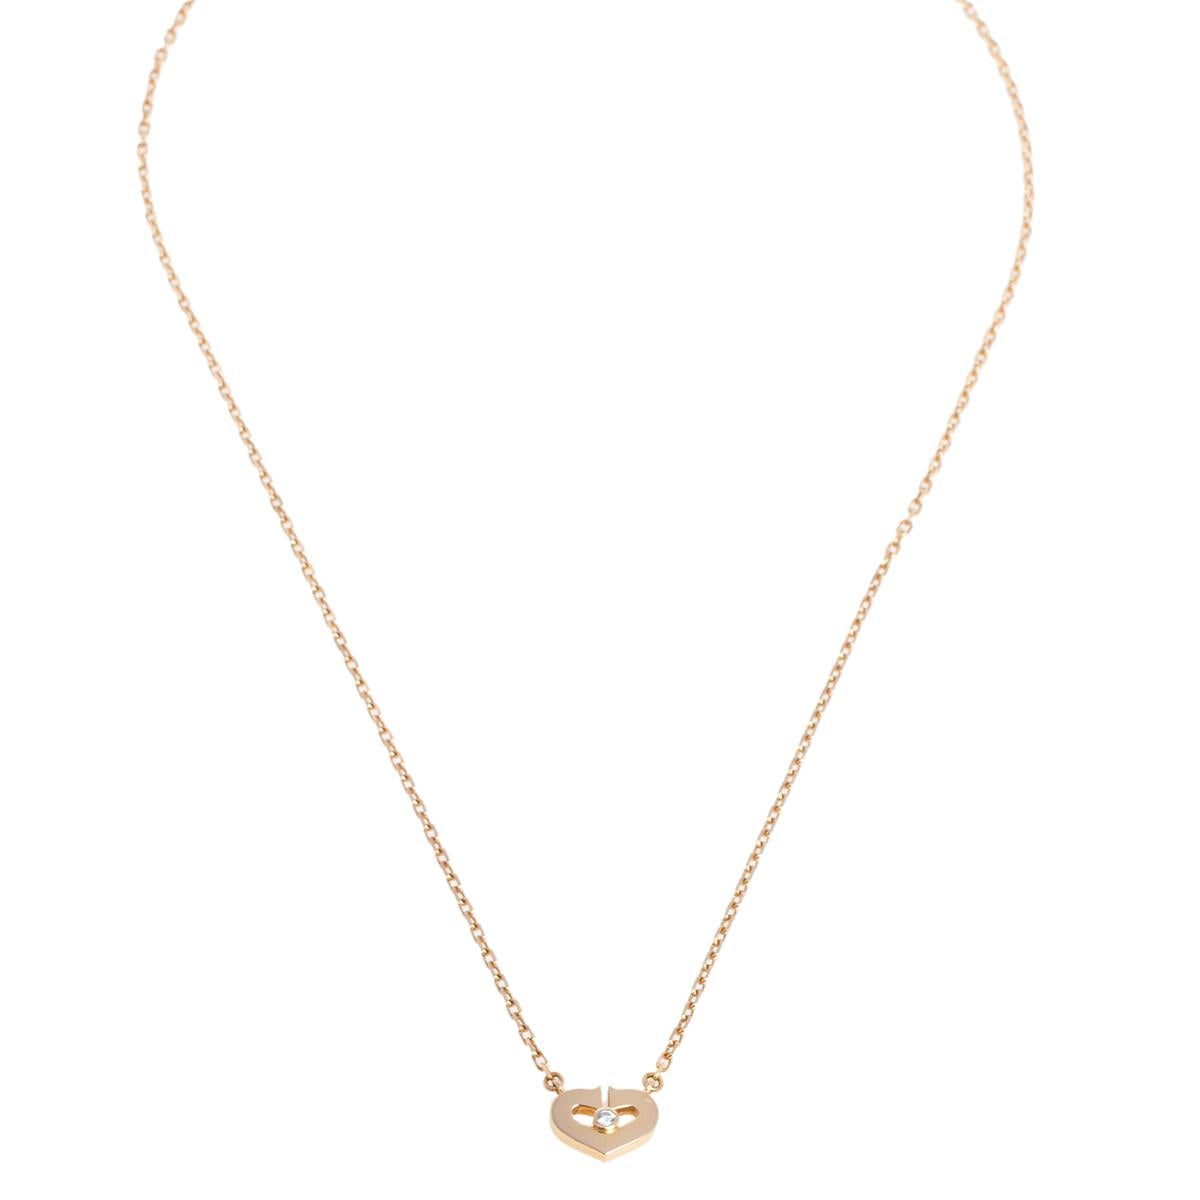 Cartier's C Heart of Cartier necklace is an elegant piece of jewelry that can be sported with everyday ensembles for a subtly chic look. It has an open heart-shaped fixed pendant that exudes a polished finish and has a single diamond at the center.